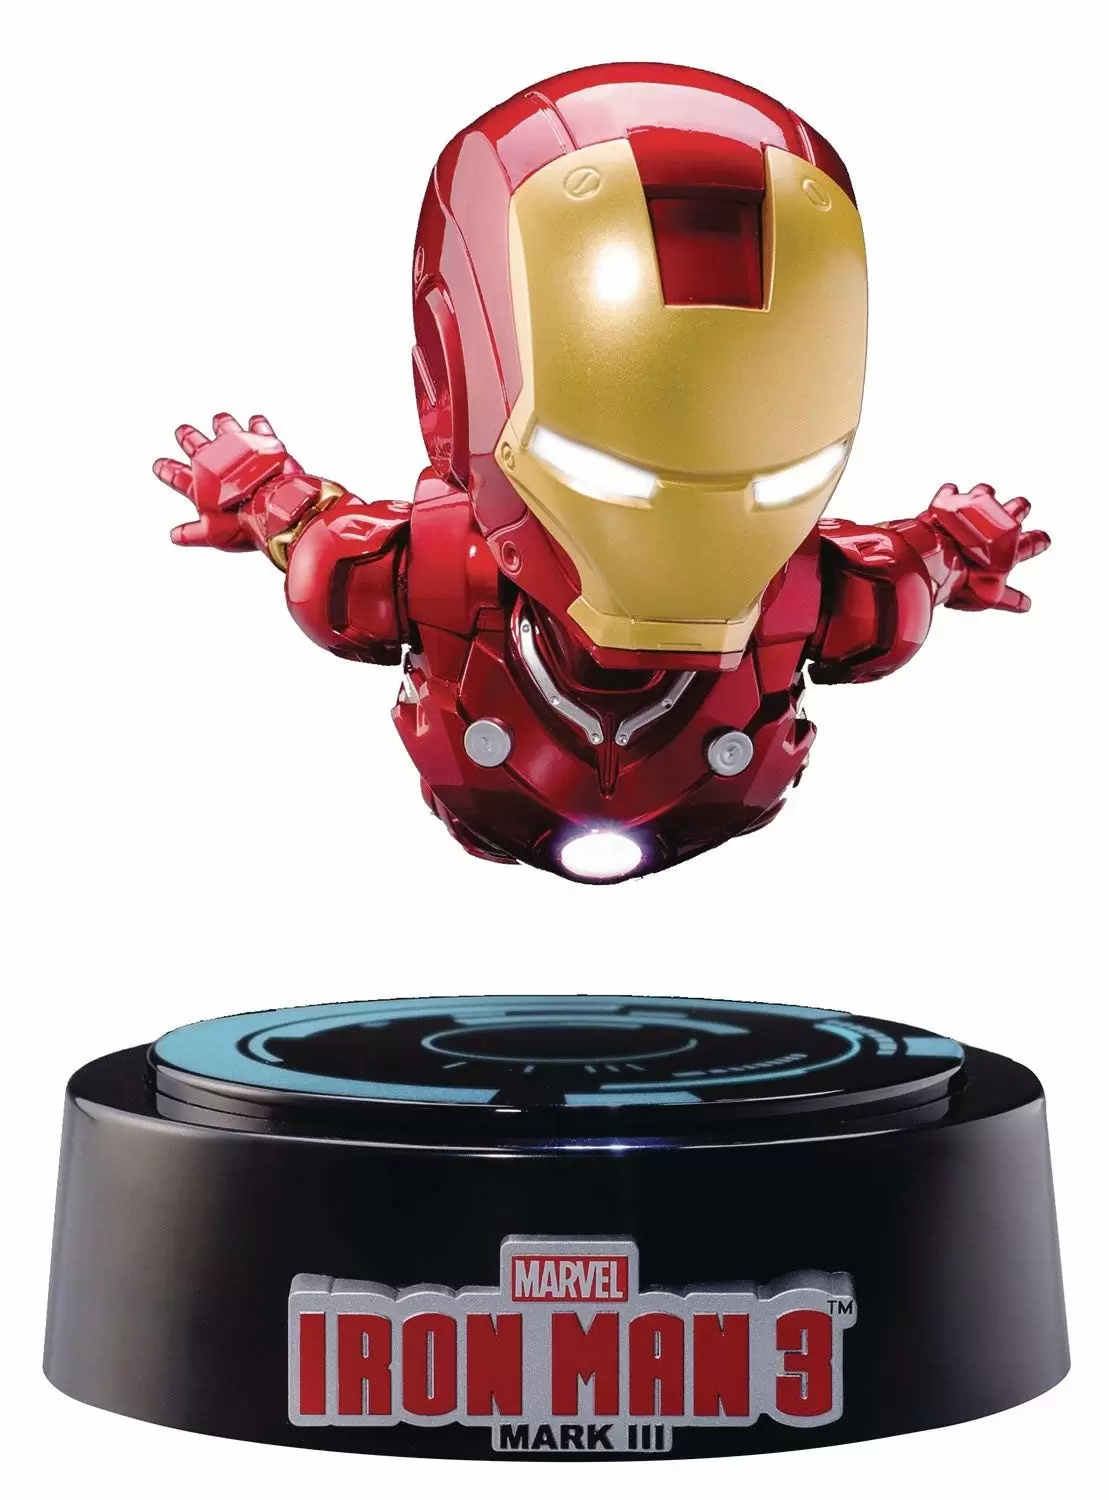 Crazy Toys Magnetic Floating Iron Man MK III New Iron Man Action Figure Collecti 